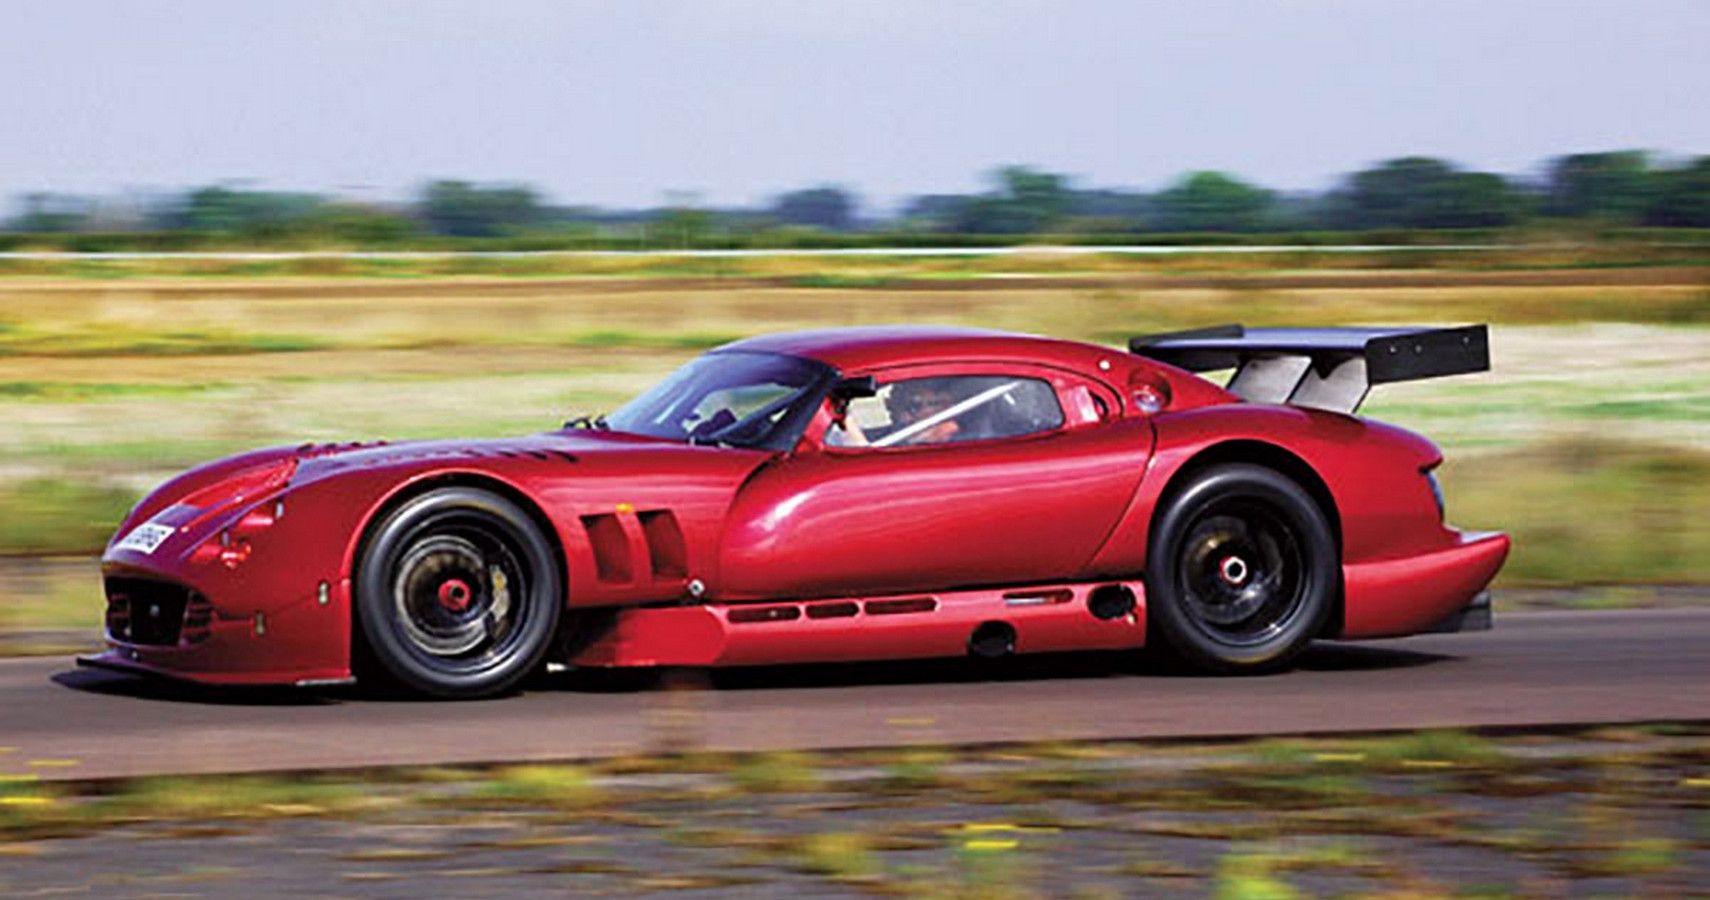 TVR Cerbera Speed 12 (Red) - Side View